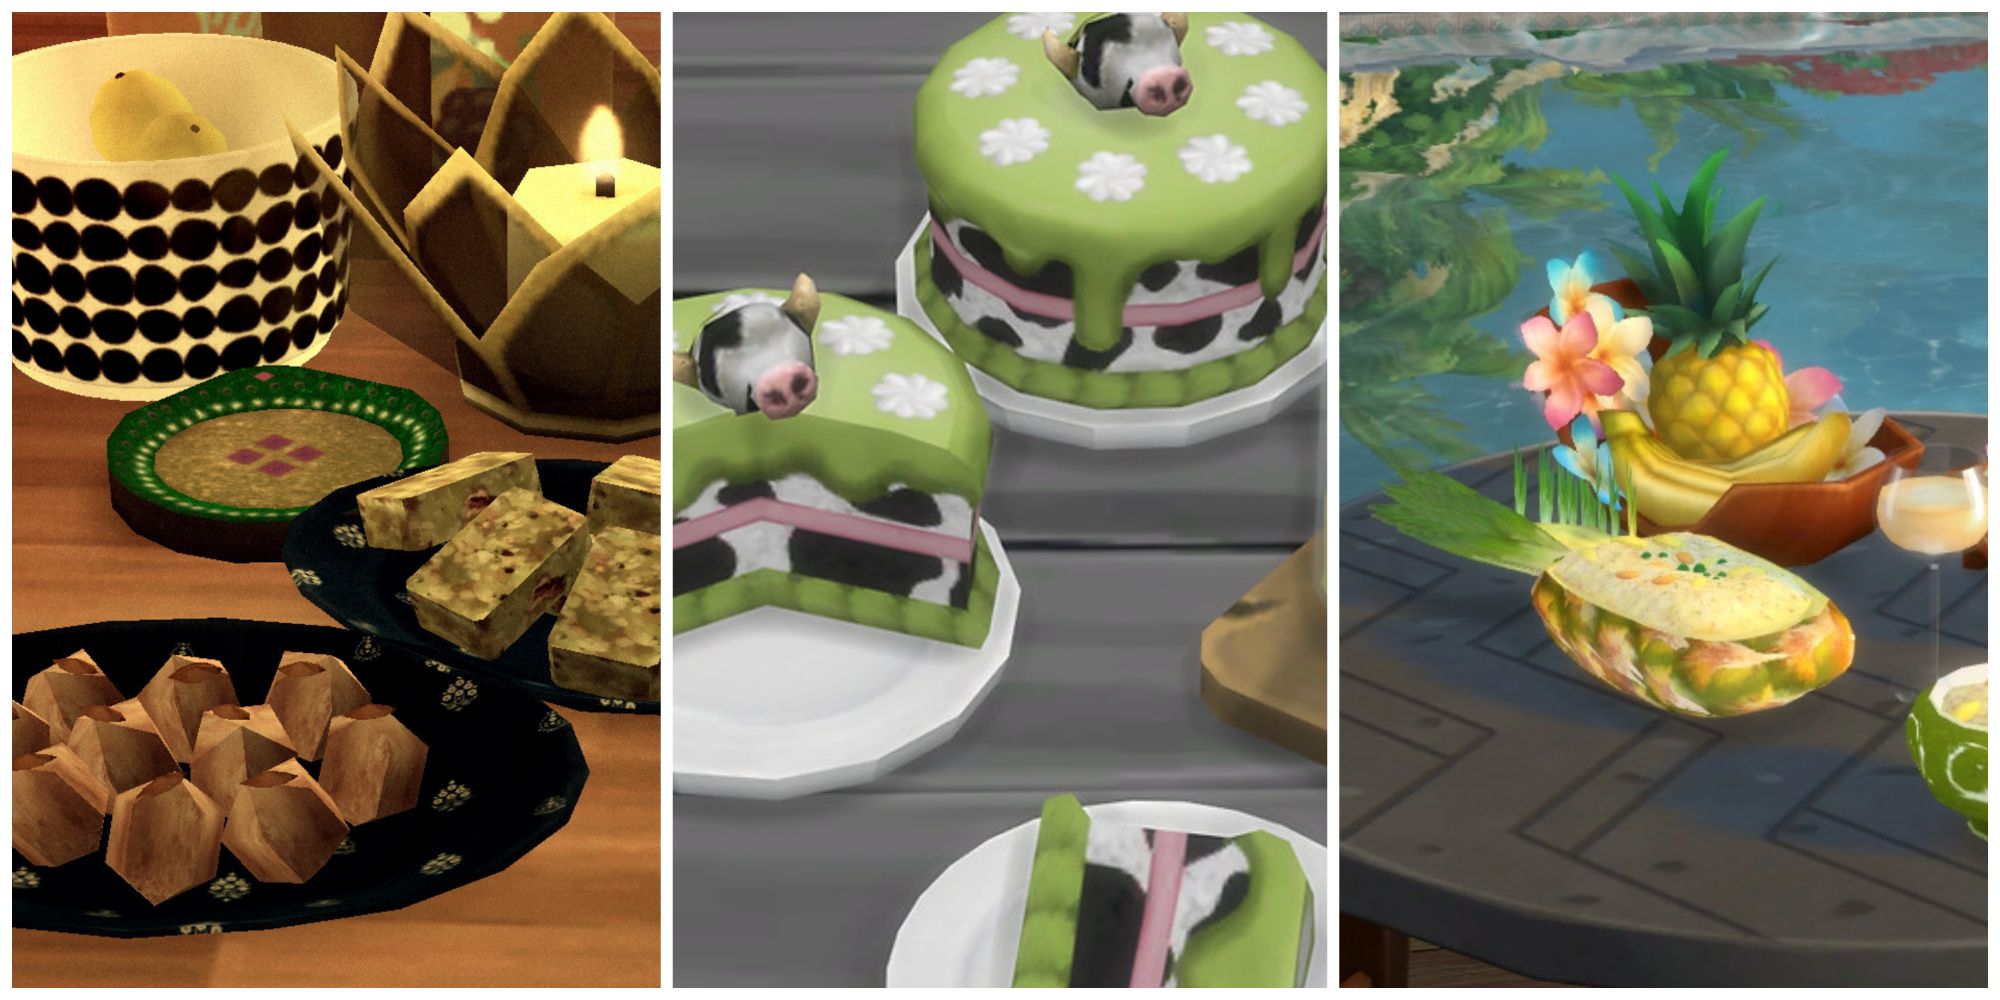 Screenshots of custom foods for The Sims 4. From left to right: a selection of Diwali sweets, a cowplant-themed layer cake, and pineapple fried rice.